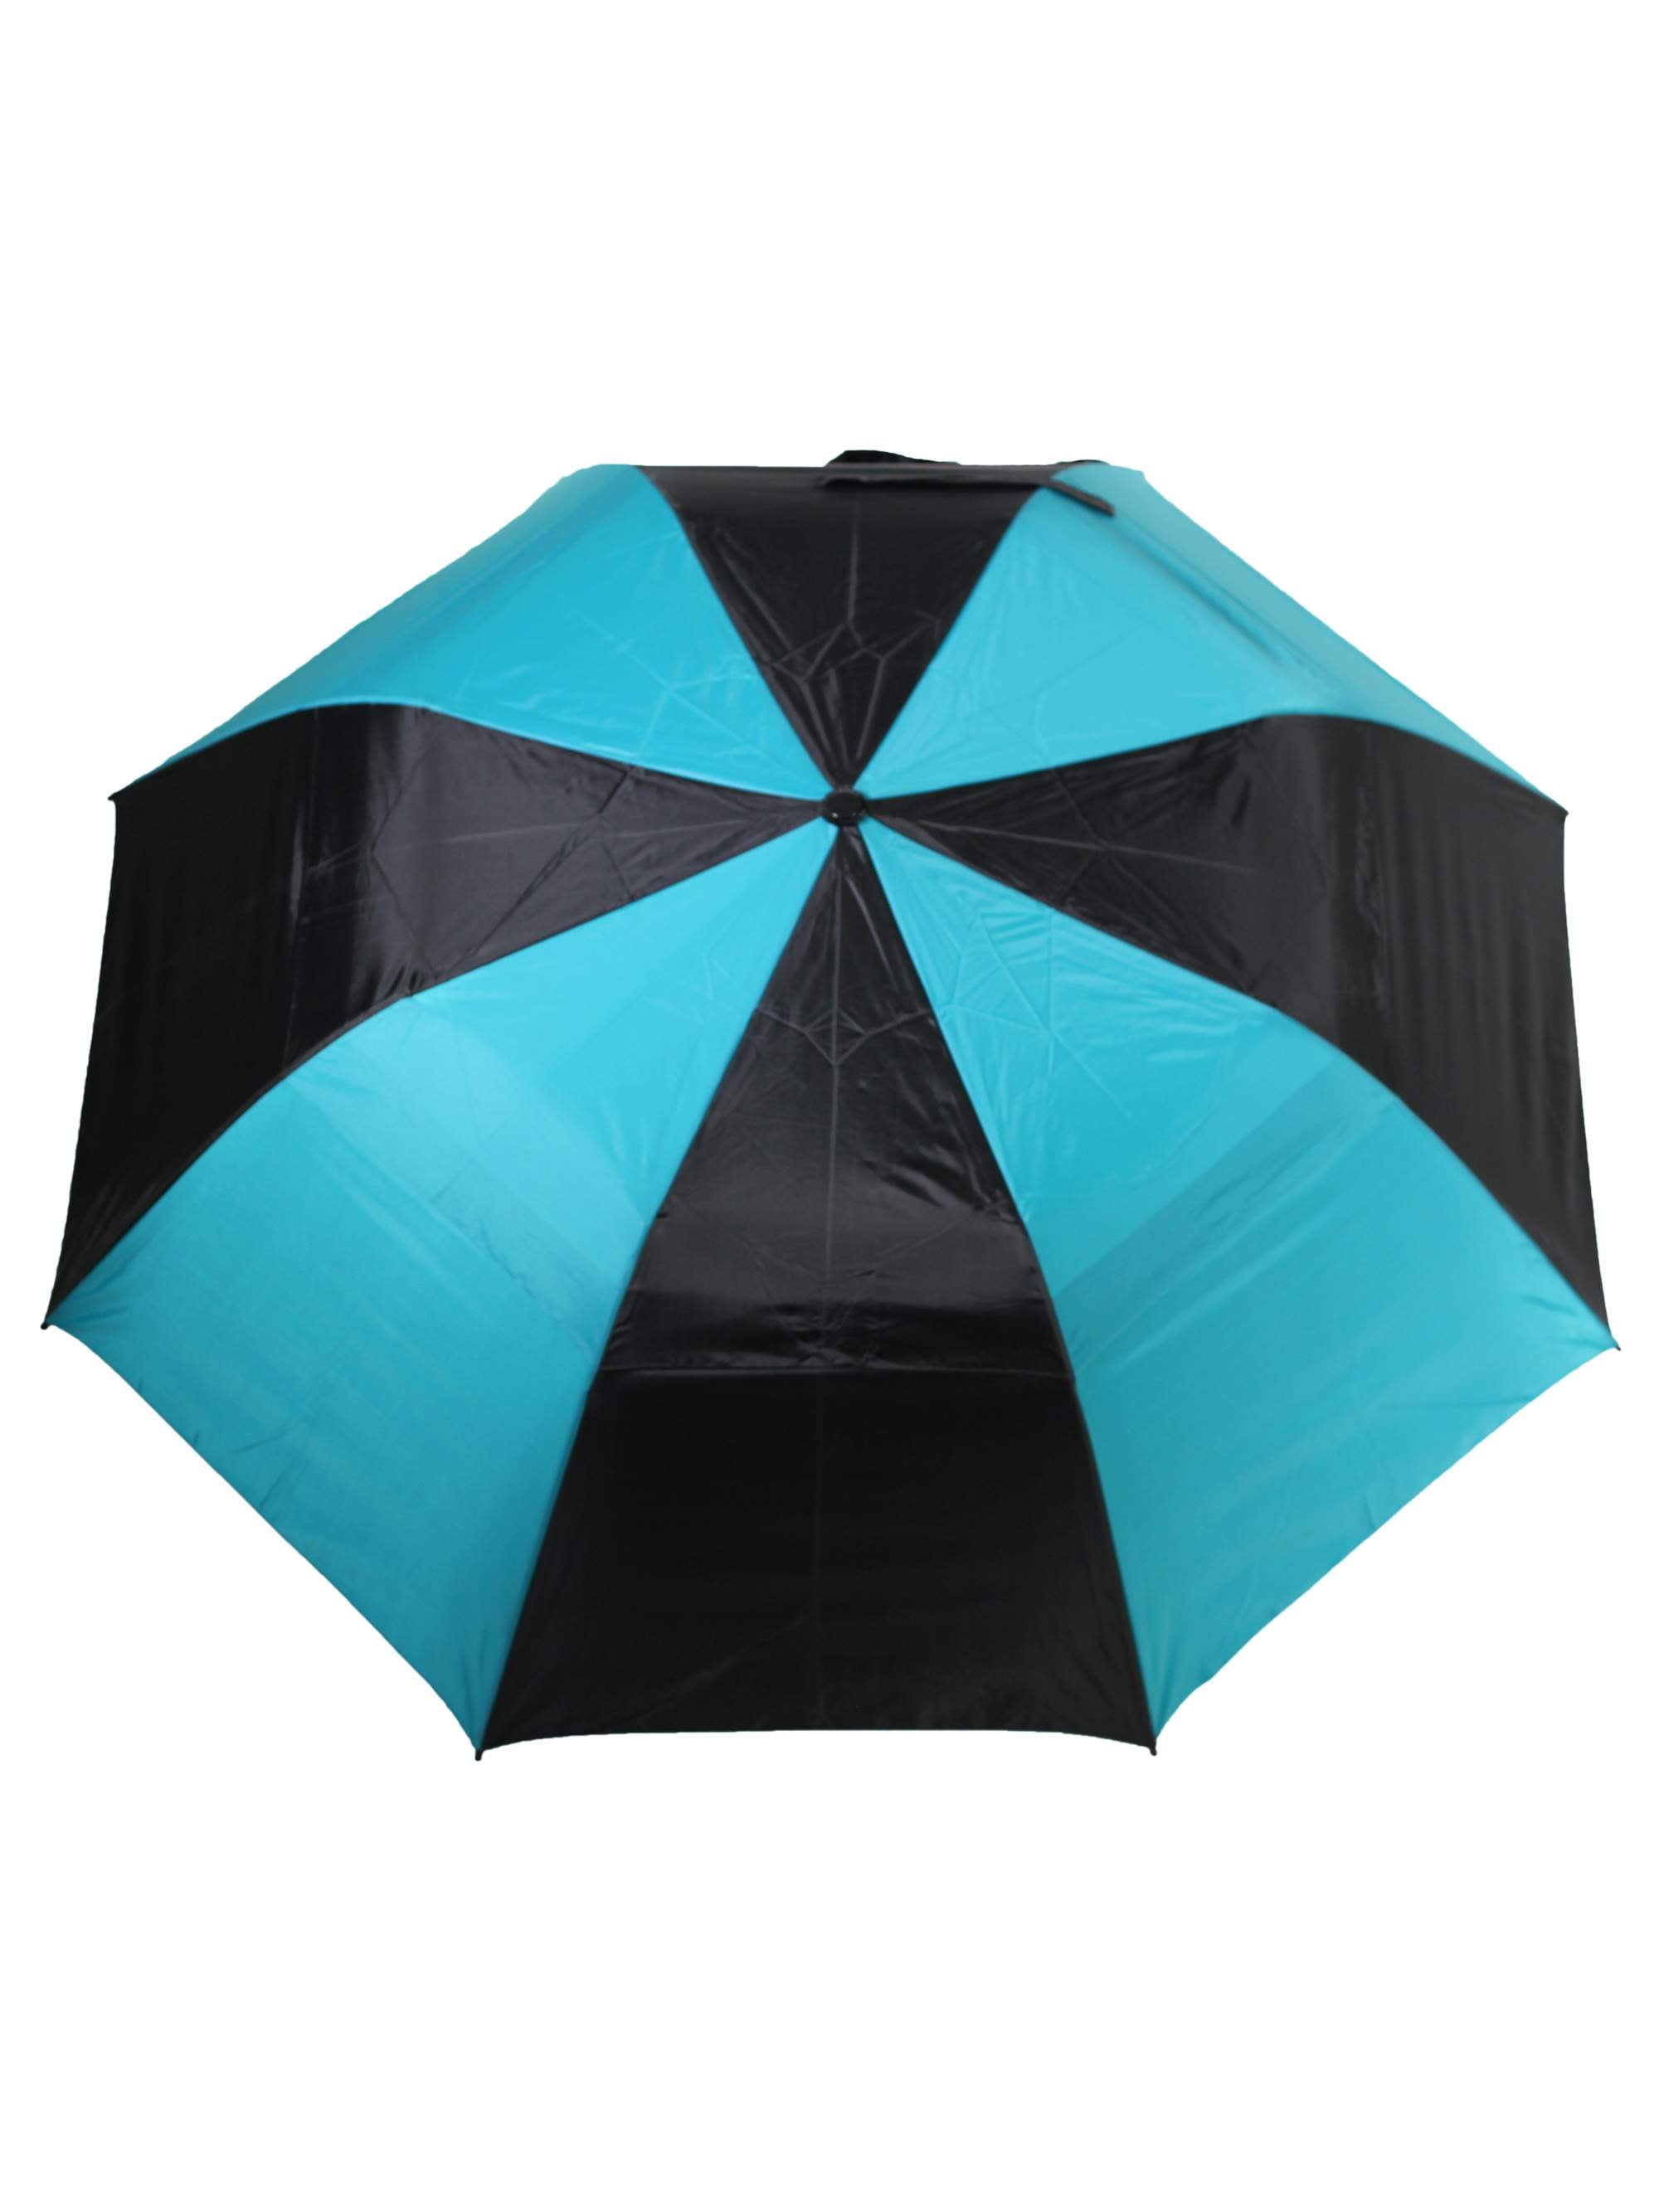 Misty Harbor Adult Automatic Open Two Person Umbrella